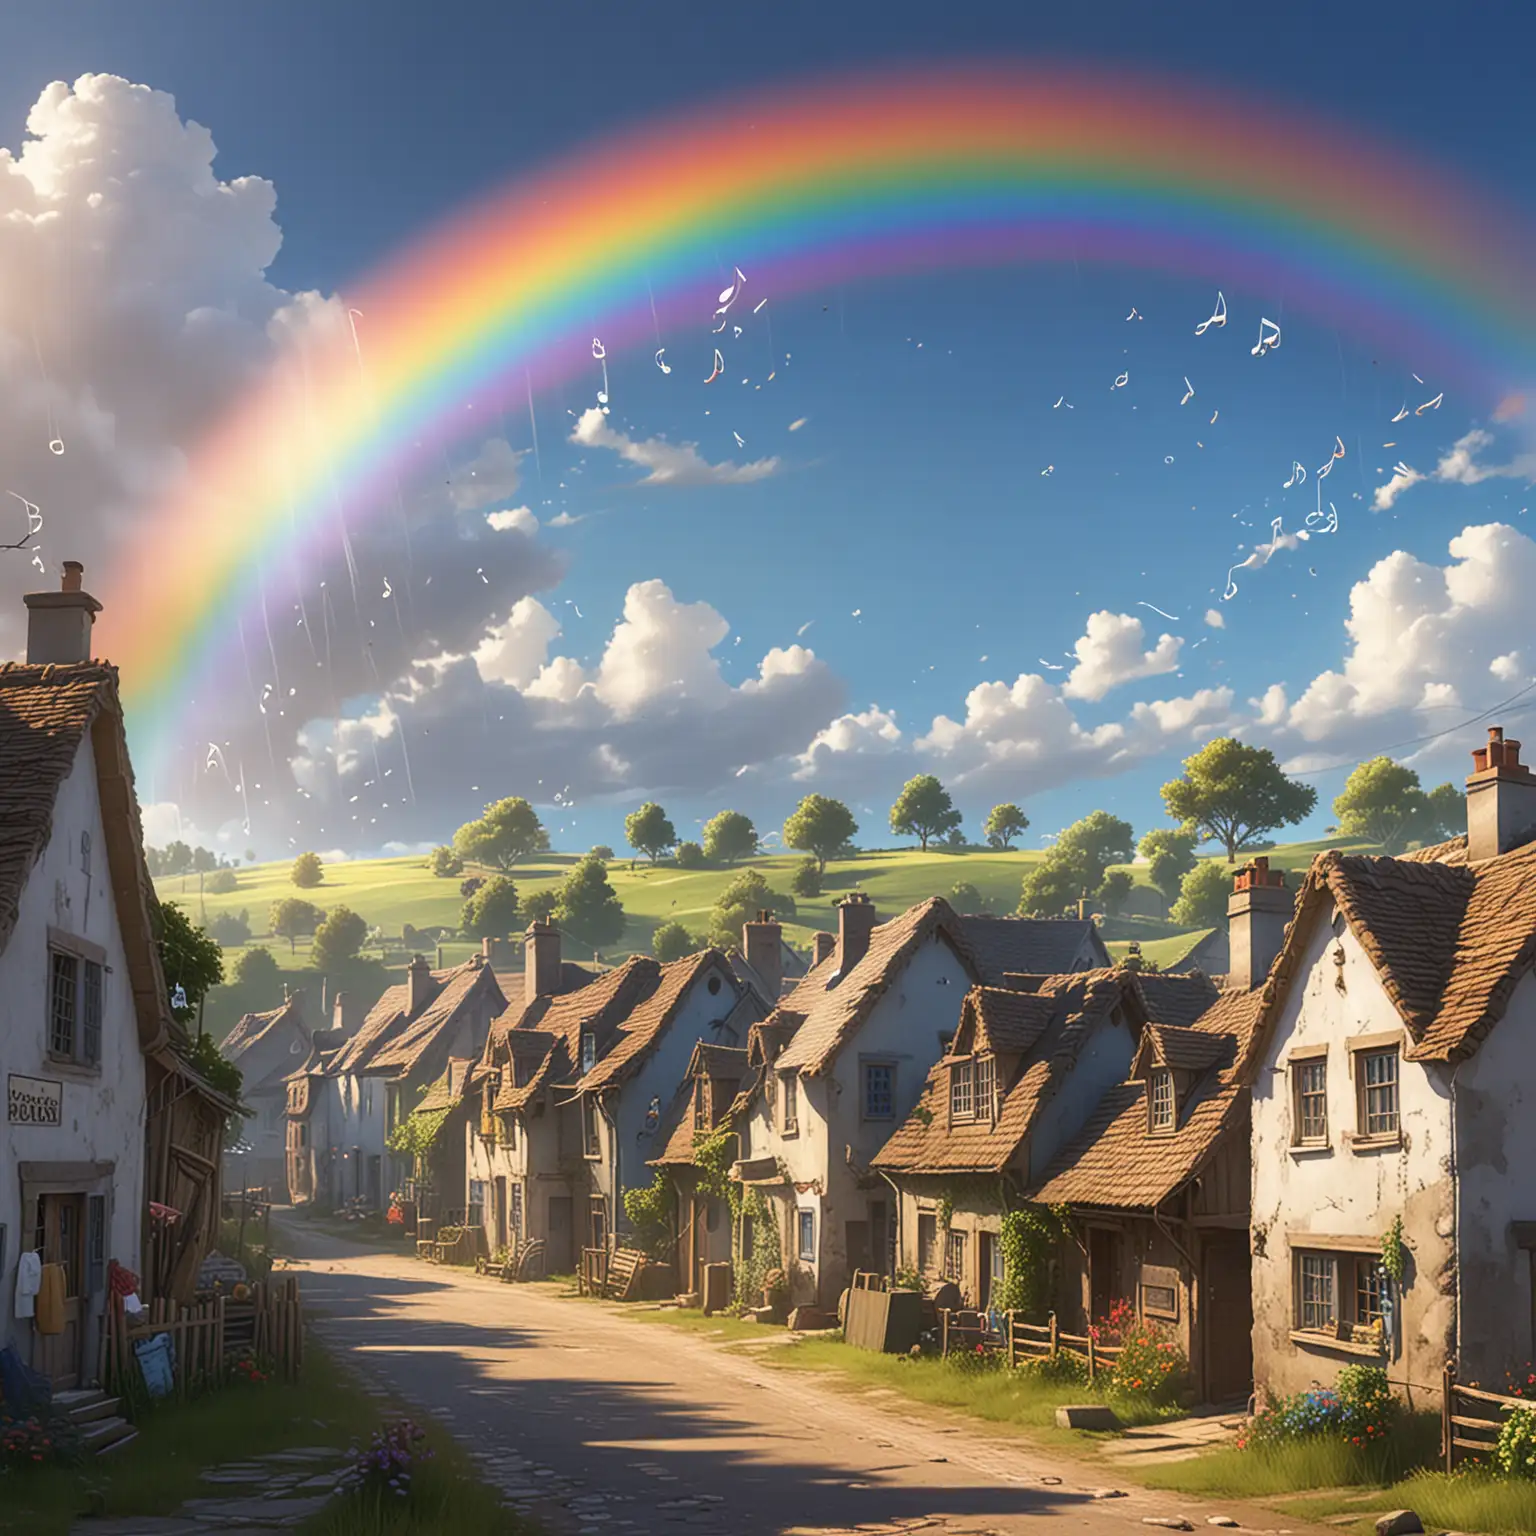 Colorful Rainbow Over Country Village with Floating Musical Notes